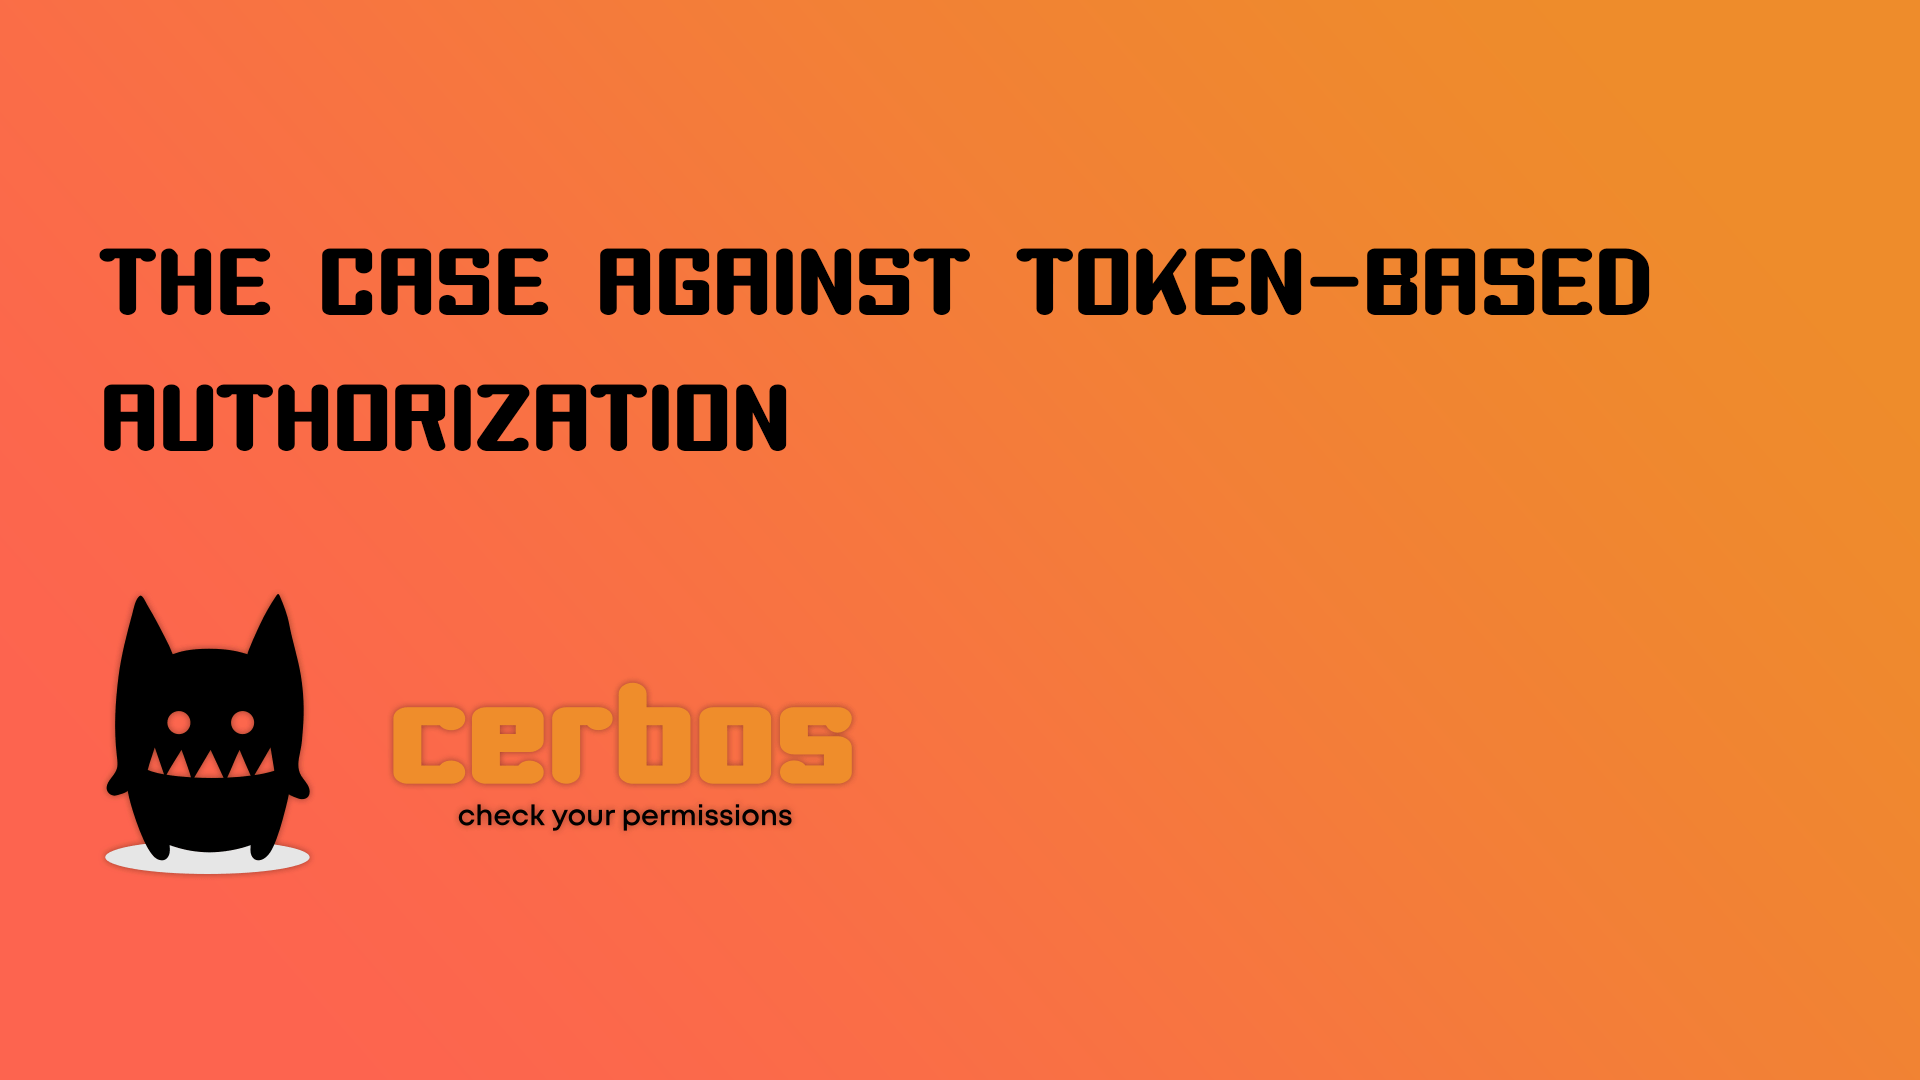 The Case Against Token-Based Authorization